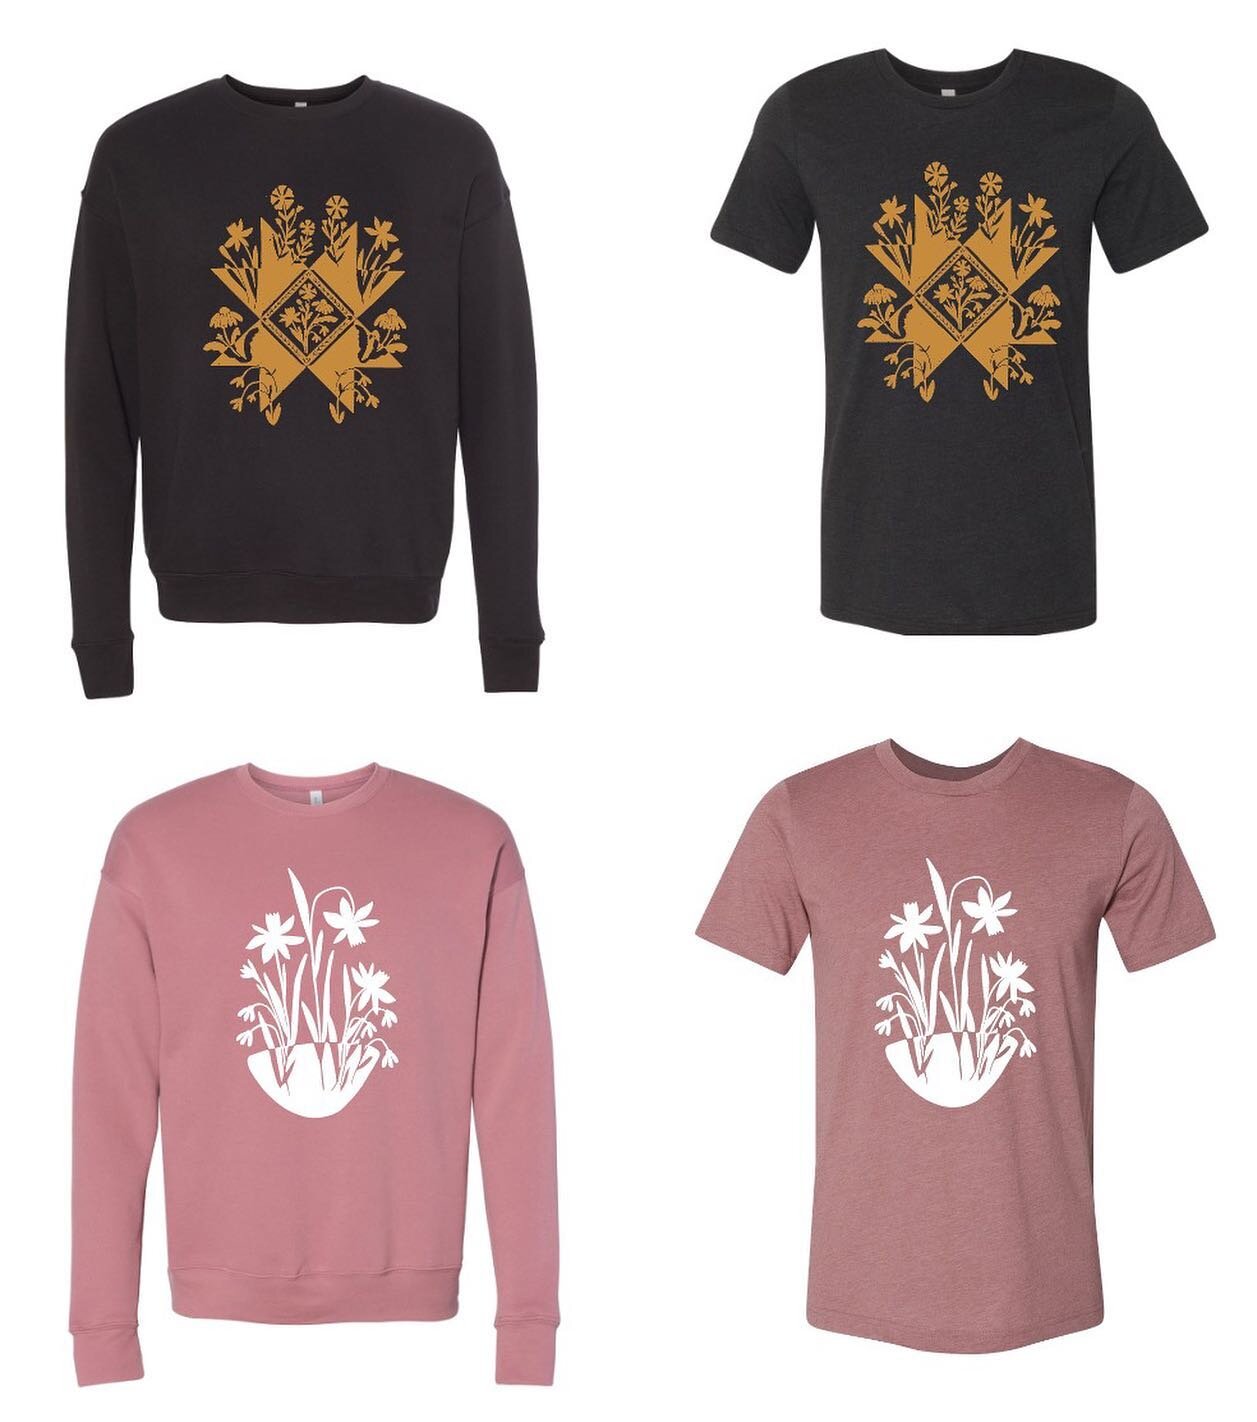 Sustainably made sweaters and Tees featuring my artwork! 
4 more days to order!! Orders close April 9!

-shipping estimate May 2021
-for more info: www.richellebergen.com